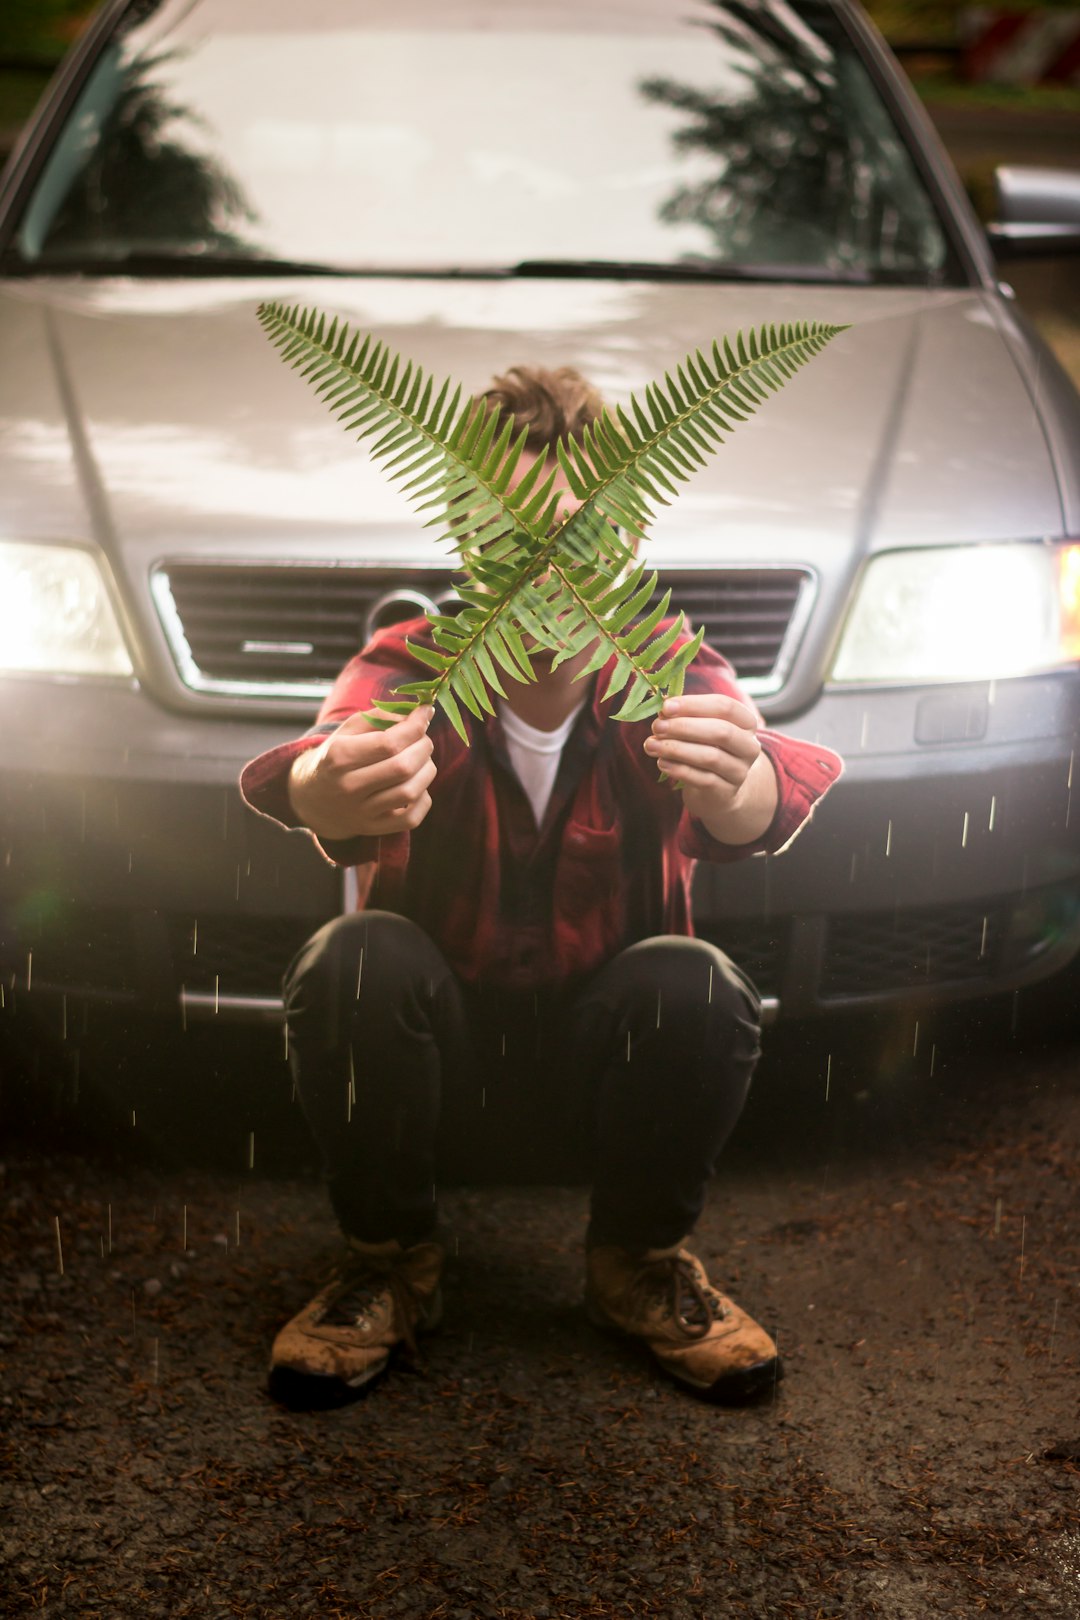 man crossing fern leaves while squatting in front of vehicle